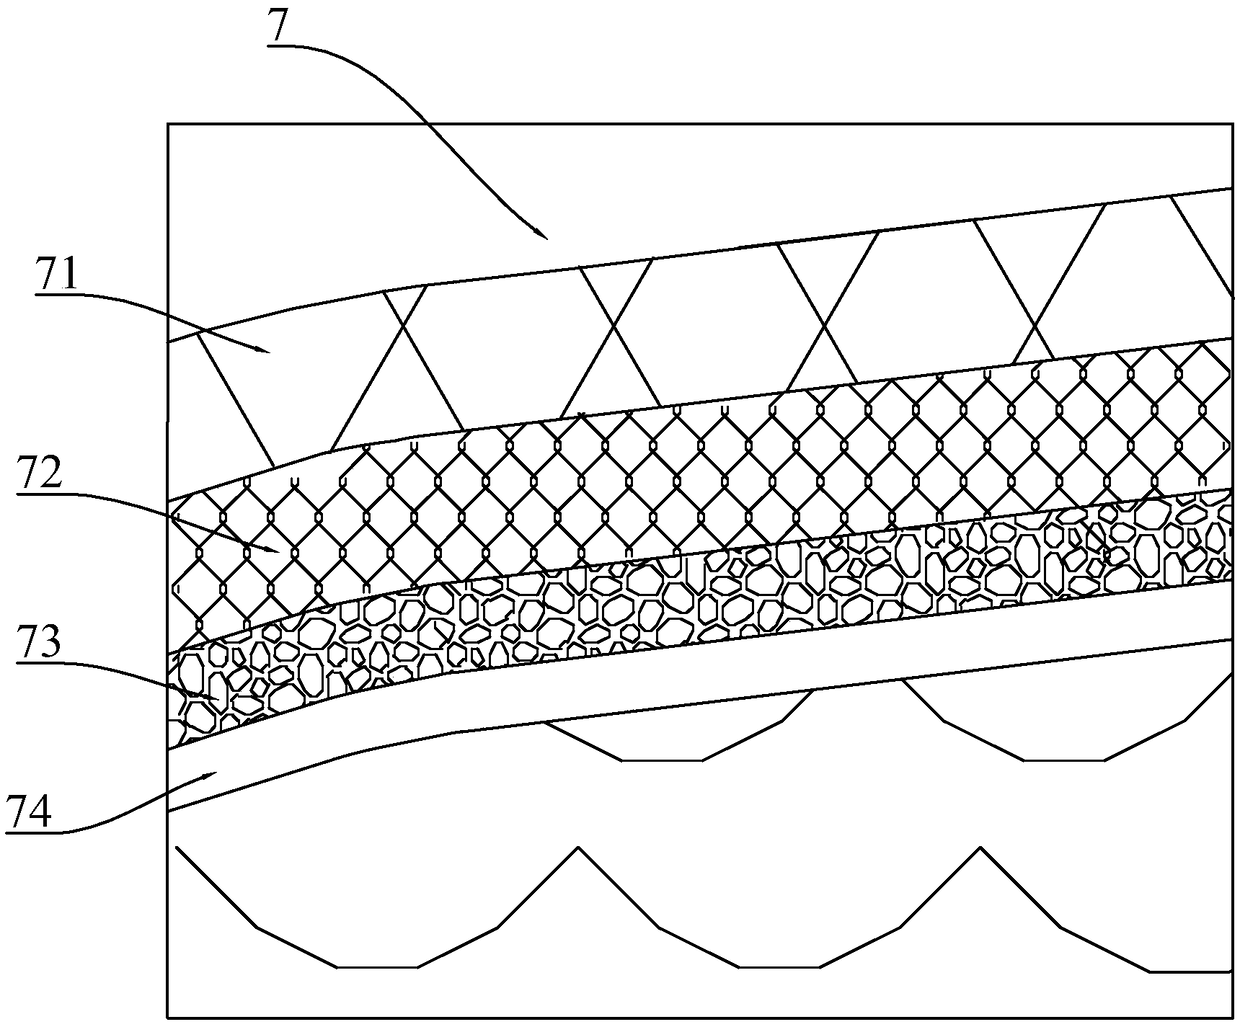 Ecological bay channel based on permeable dike